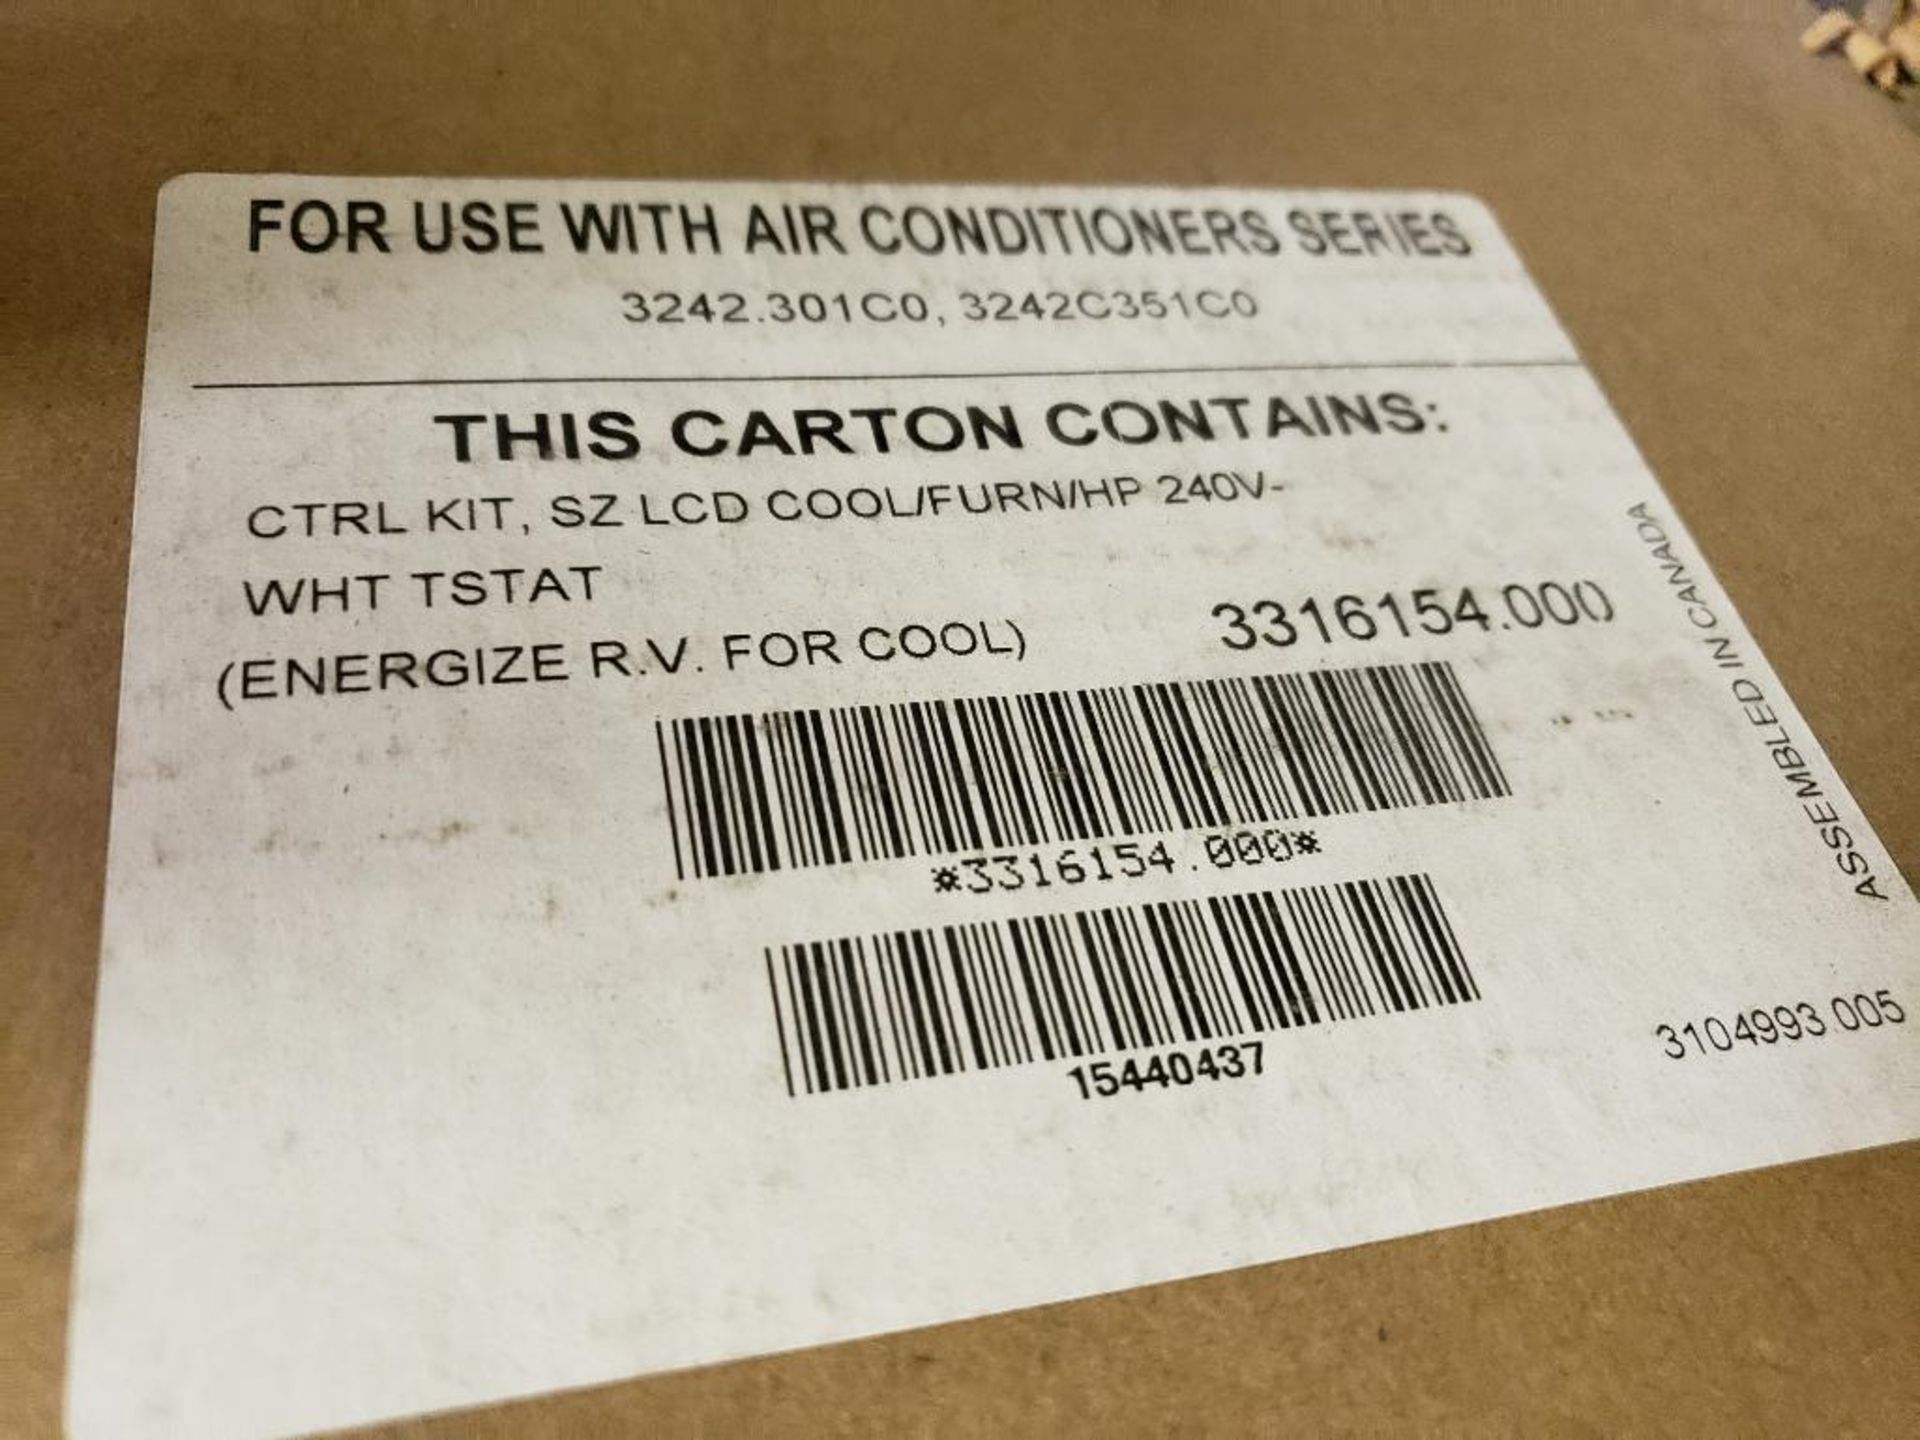 Qty 20 - Dometic air conditioner control. Part number 3316154.000. With Thermostat. New kit in box. - Image 3 of 3